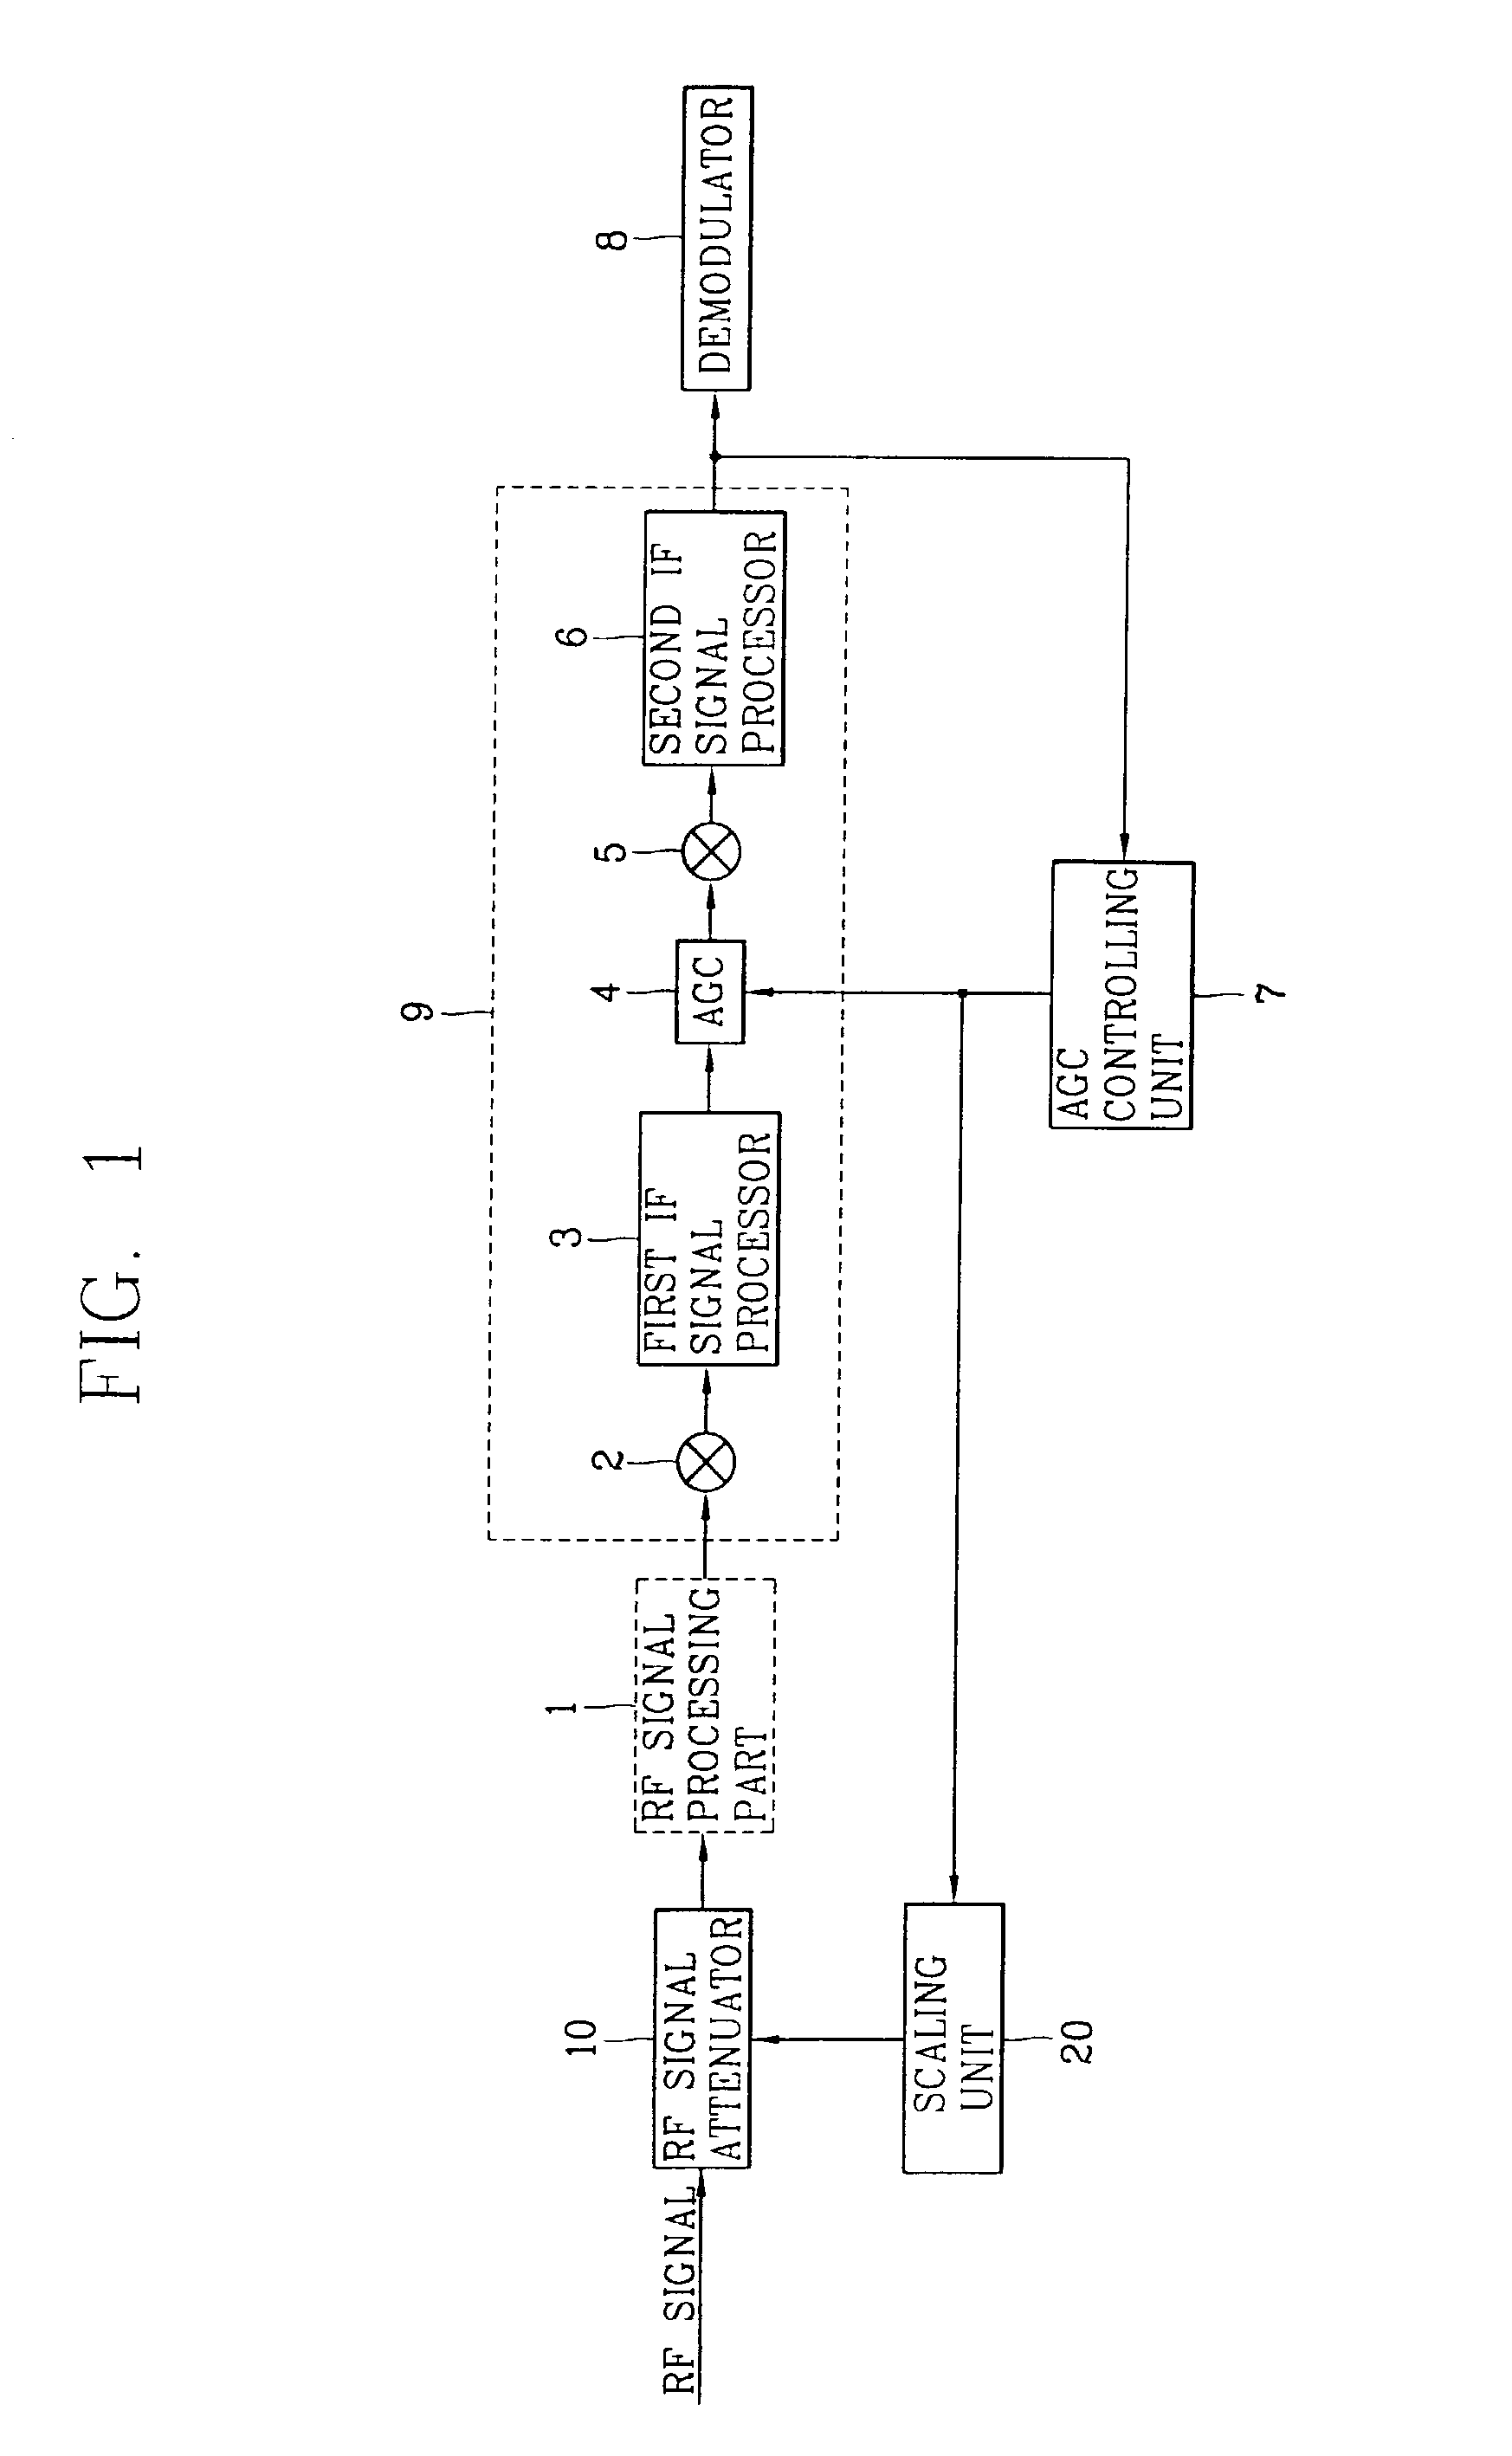 Radio frequency signal attenuation circuitry and gain controlling unit